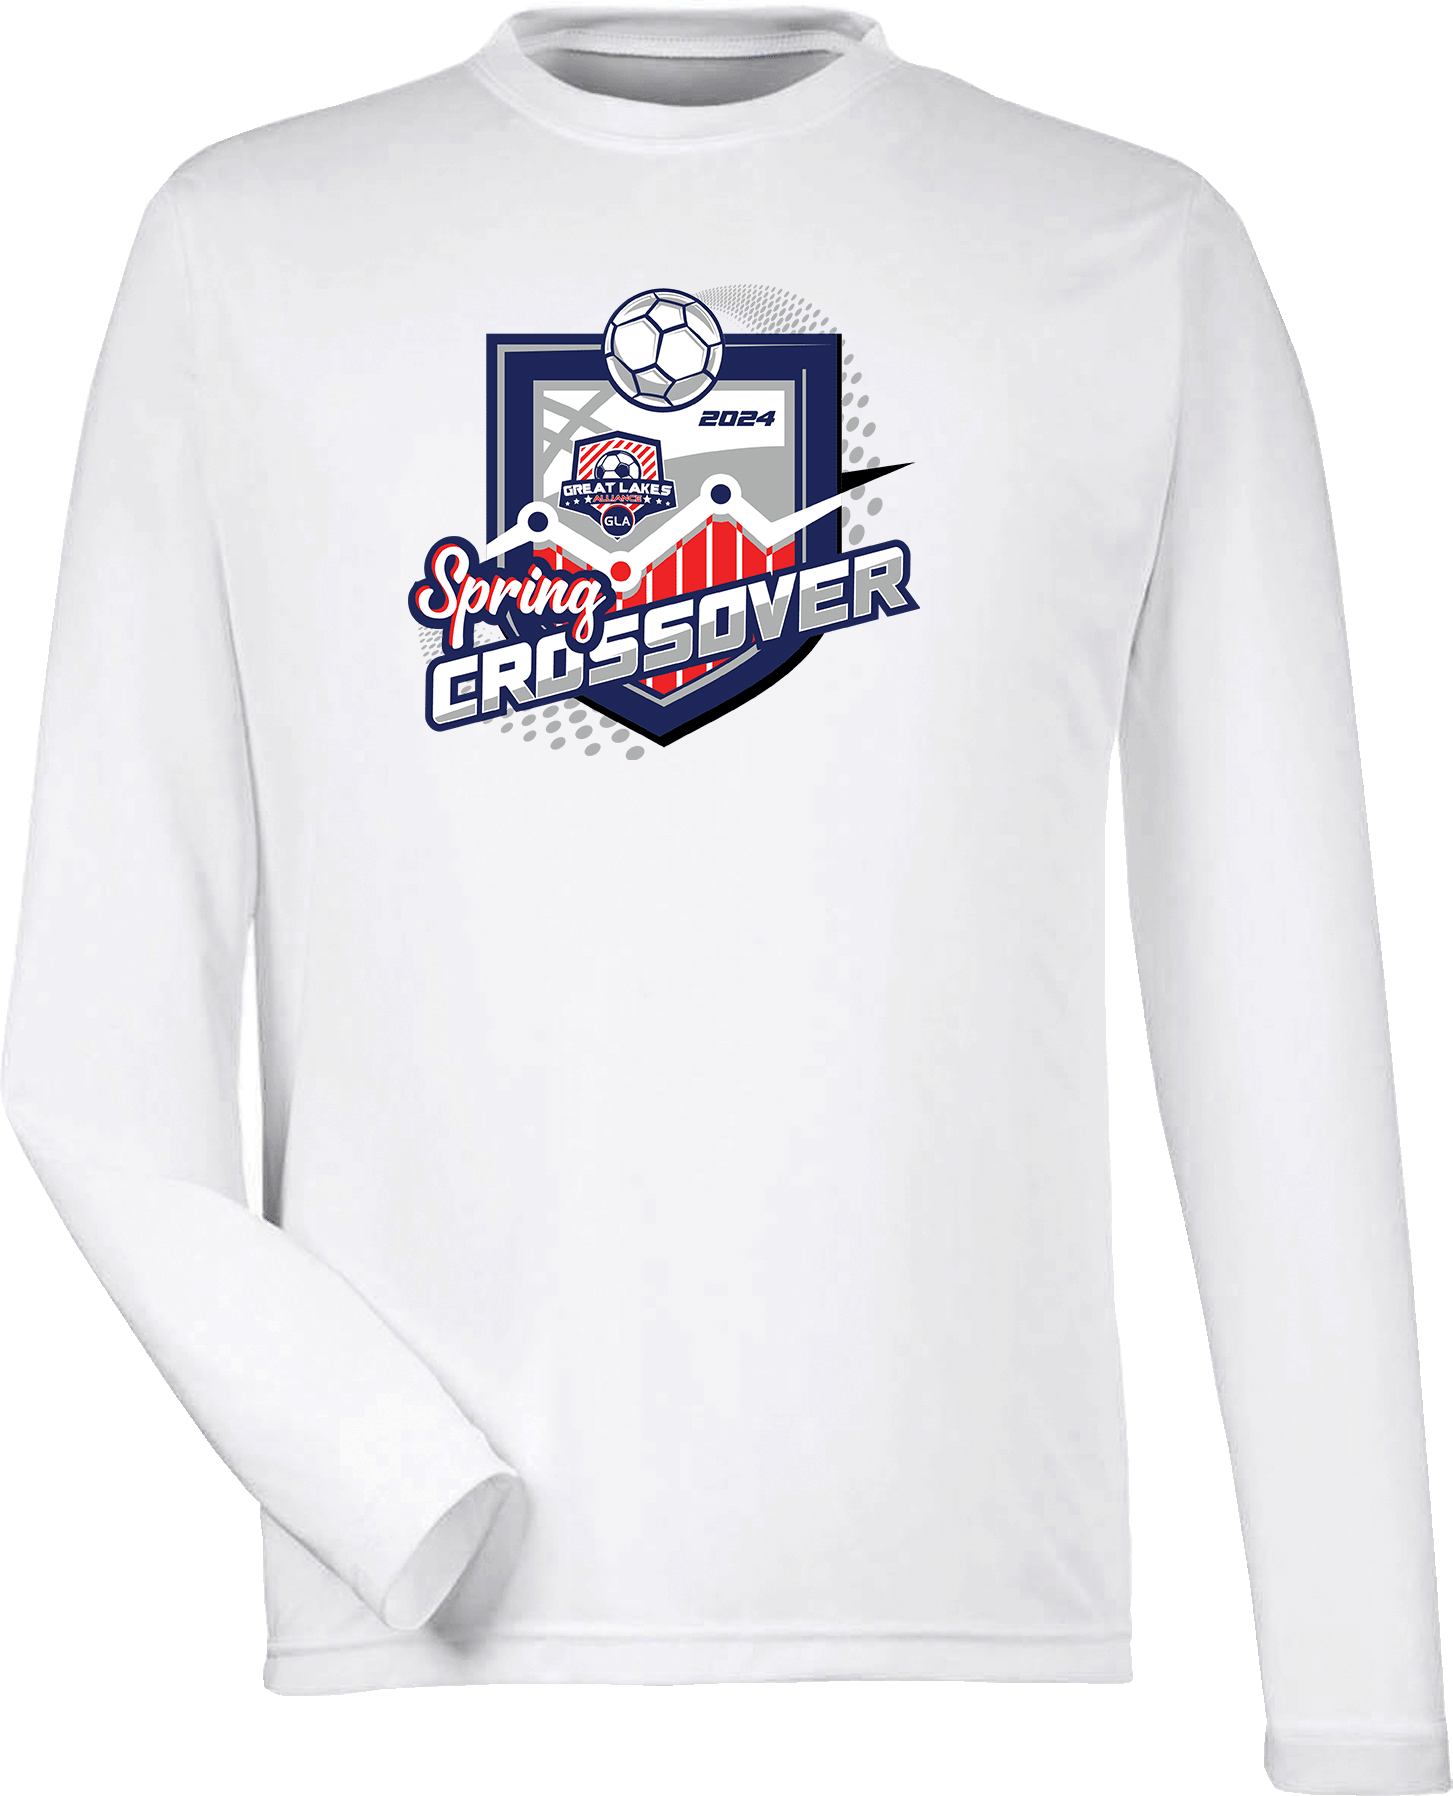 Performance Shirts - 2024 Great Lakes Alliance Spring Crossover